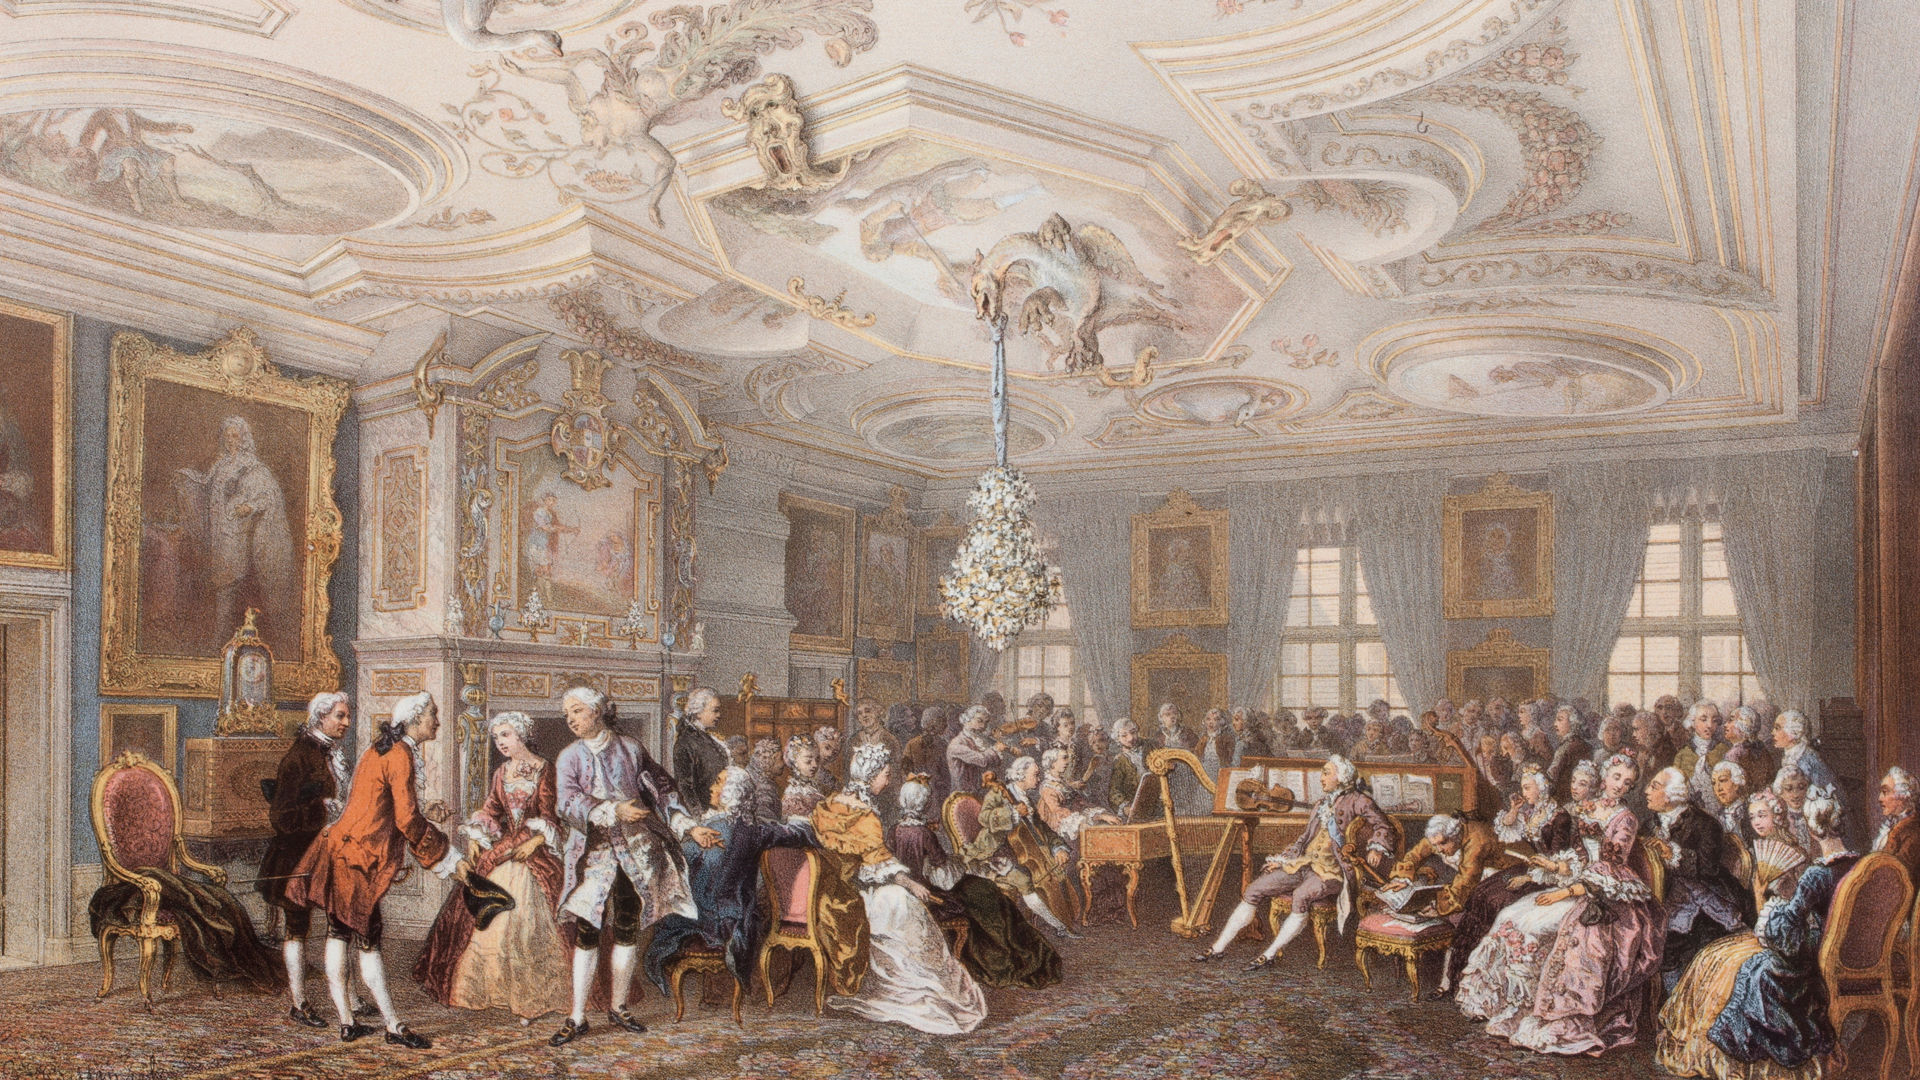 An imaginary scene from the Kings' Hall with a multitude of people in Rococo dress.